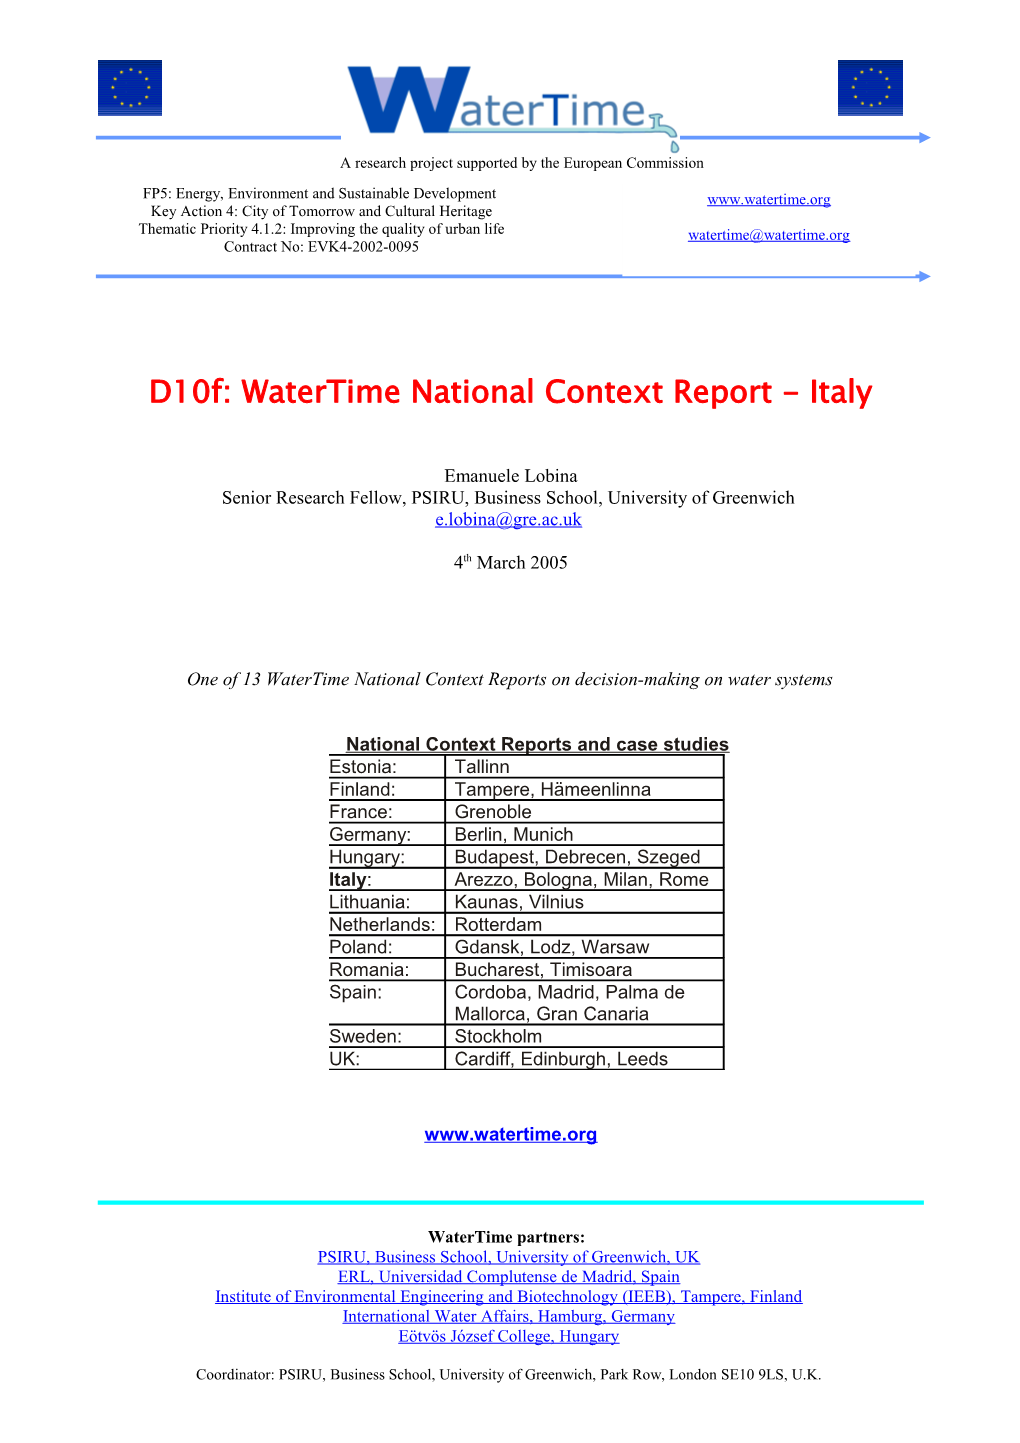 D10f: Watertime National Context Report - Italy